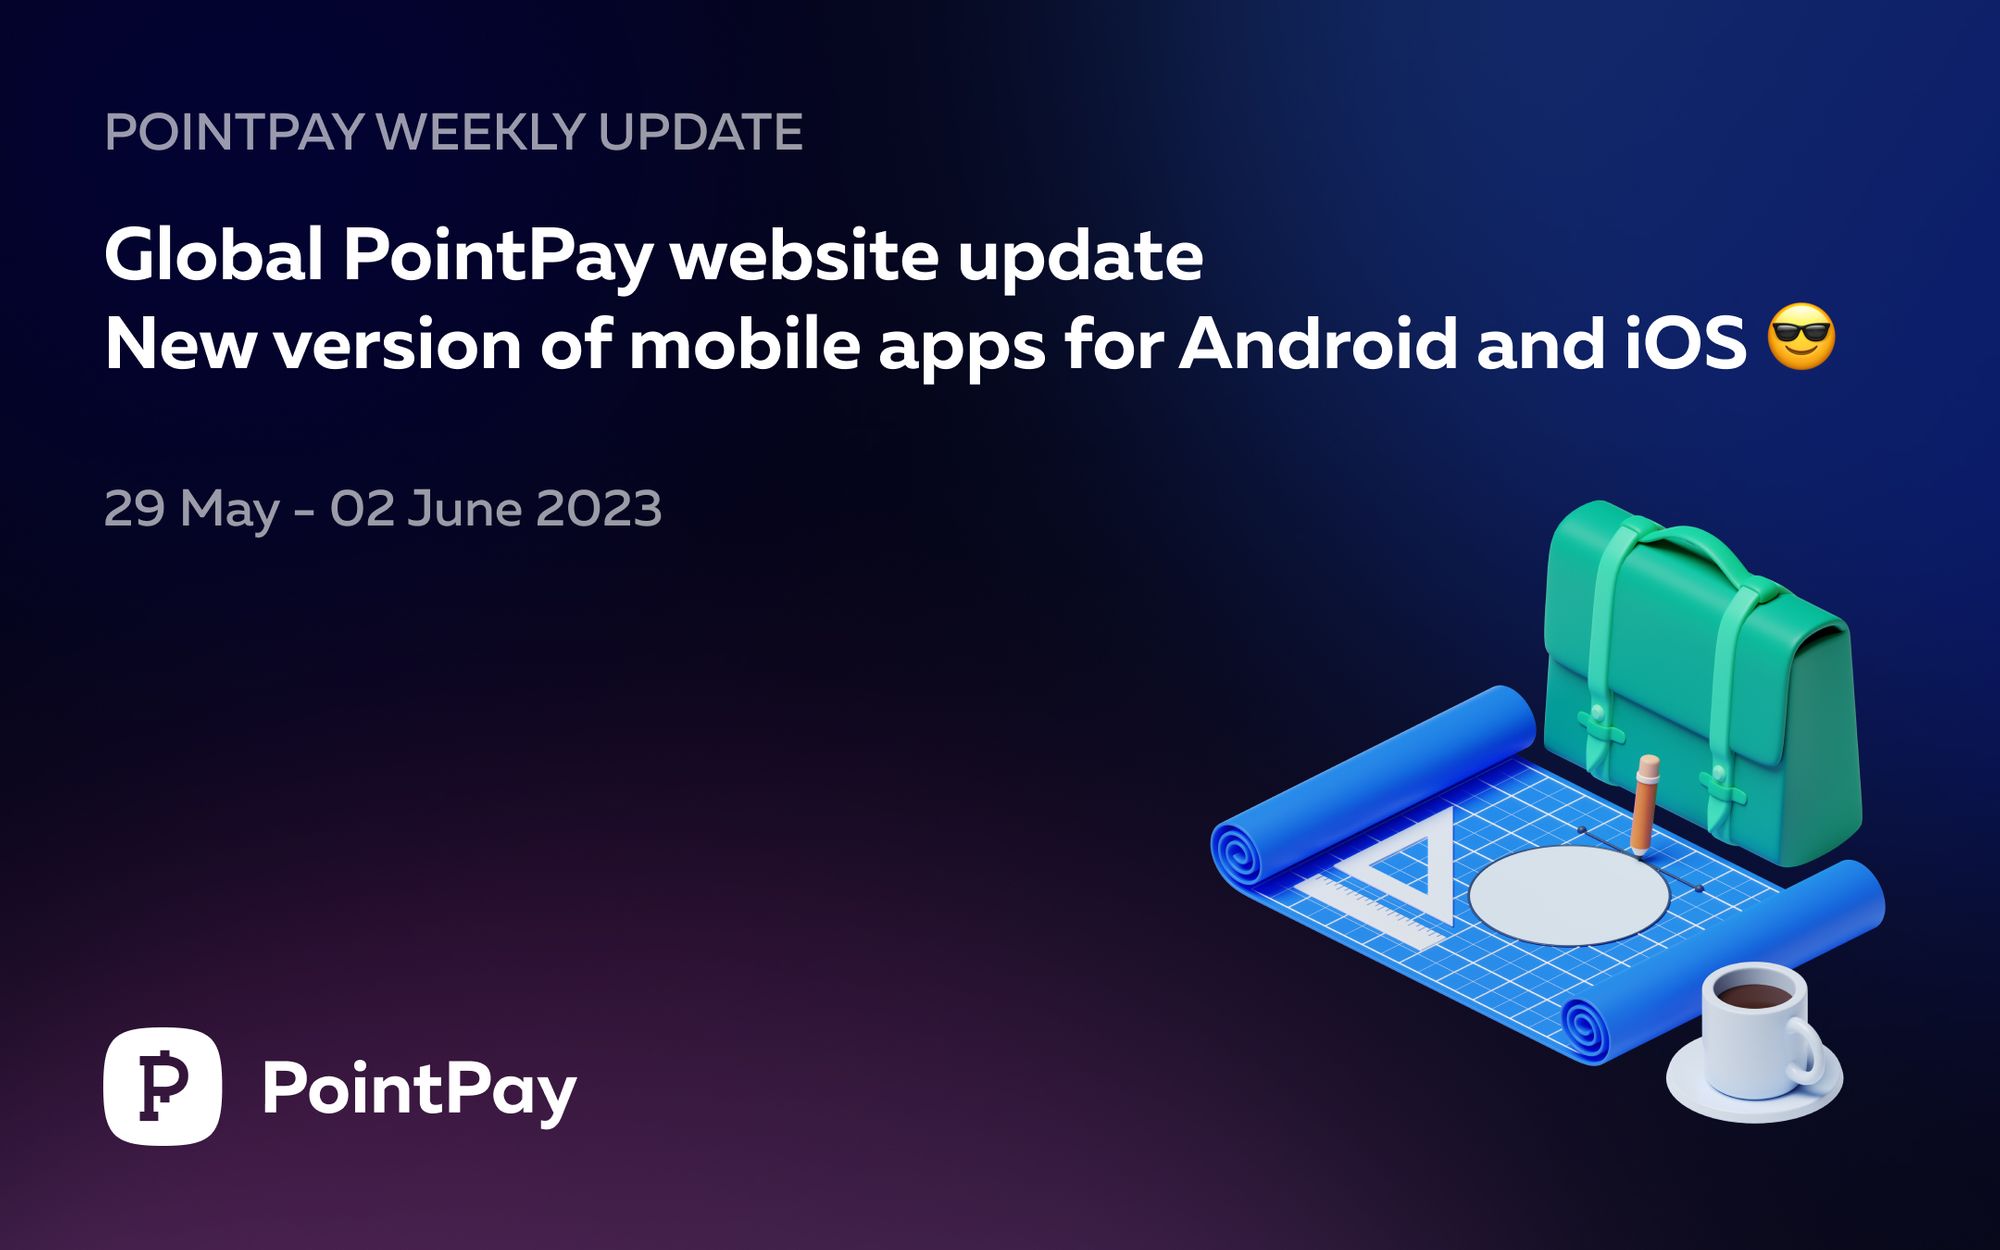 PointPay Weekly Update (29 May - 2 June 2023)